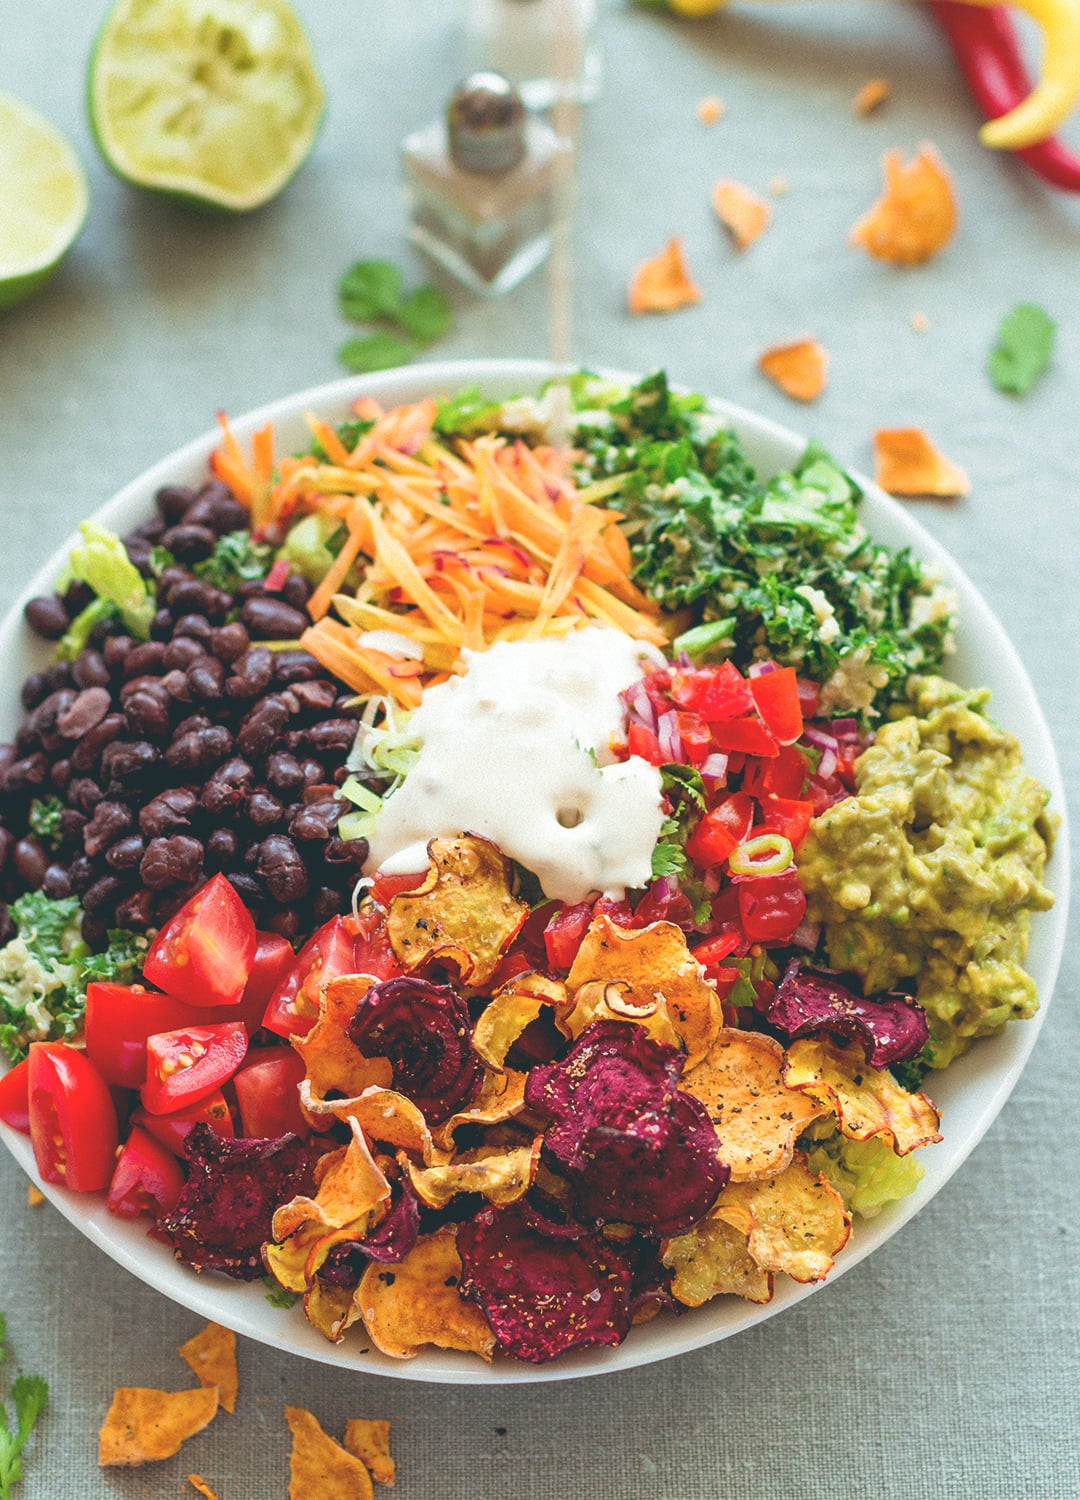 Mexican Kale Salad with Cashew Dressing aka the best salad in the world. Kale, black beans, spicy salsa, guacamole, cherry tomatoes, carrots, veggie chips, and amazing cashew dressing! | thehealthfulideas.com